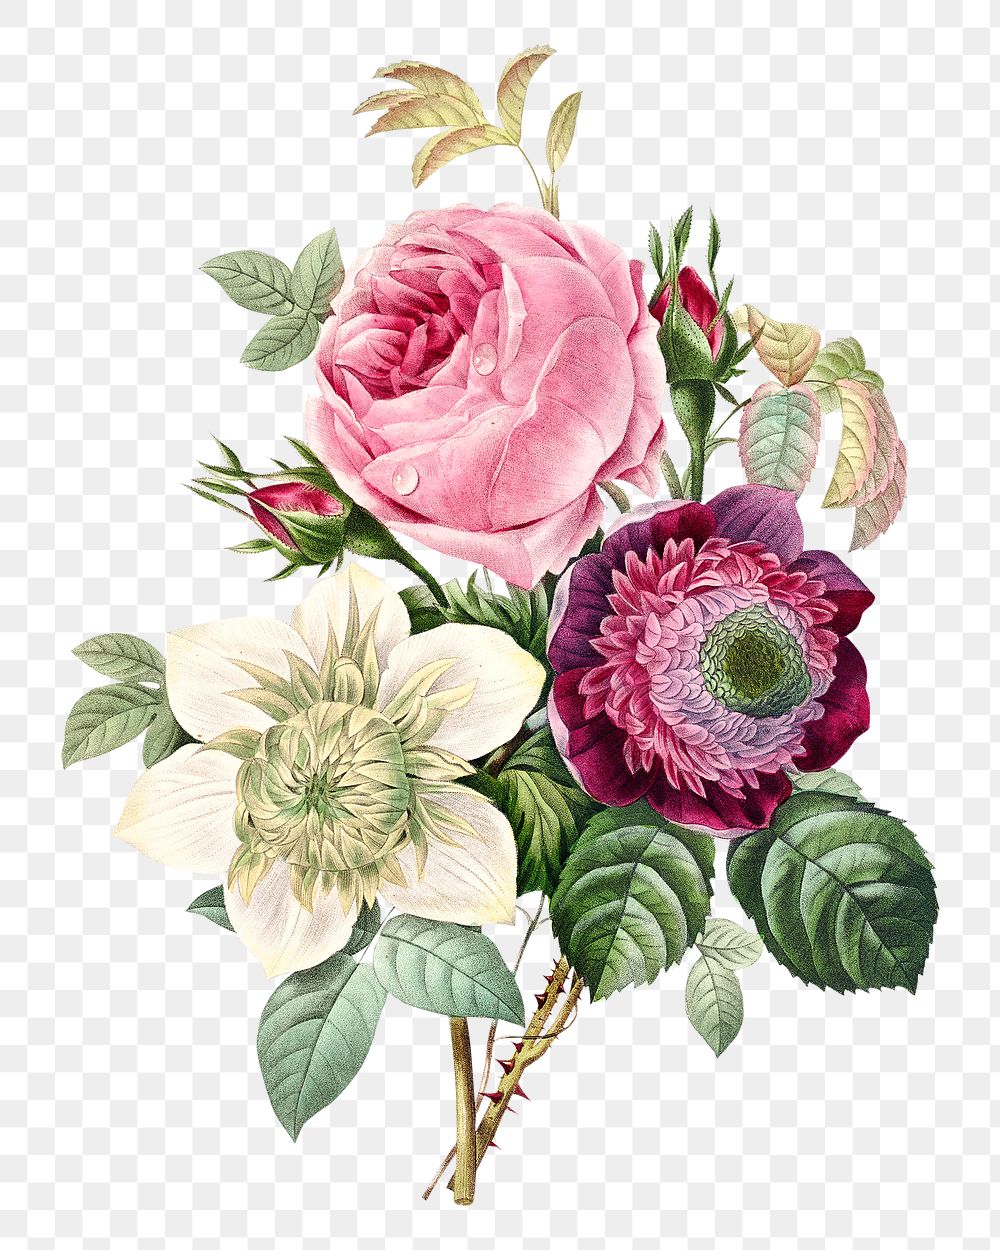 Anemone and cabbage rose flower png botanical illustration, remixed from artworks by Pierre-Joseph Redout&eacute;